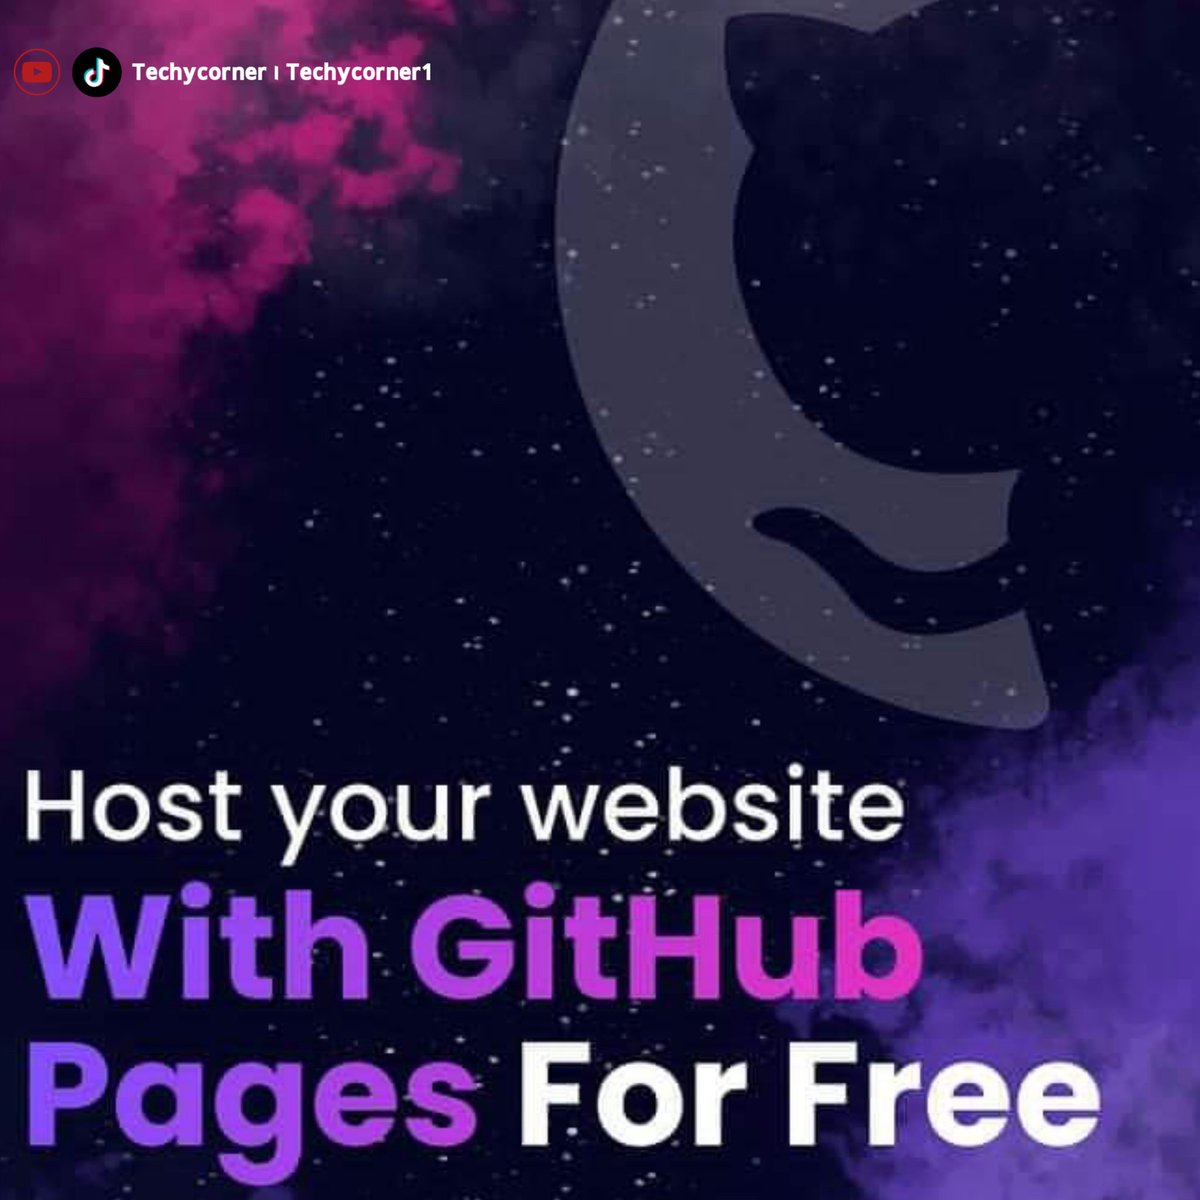 06 DAYS TO GO 🥇🥇🥇
 Day 54 of 60 days: HOW TO HOST YOUR WEBPAGE IN GITHUB
.
linkedin.com/posts/babatund… @followers @github @GitHubEducation @GitHubCommunity
.
To all DEVS, KINDLY ENGAGE🚀🚀🚀 #git #githubactions #hosting #host #webpages #websitedesign #webdevelopment #webdeveloper